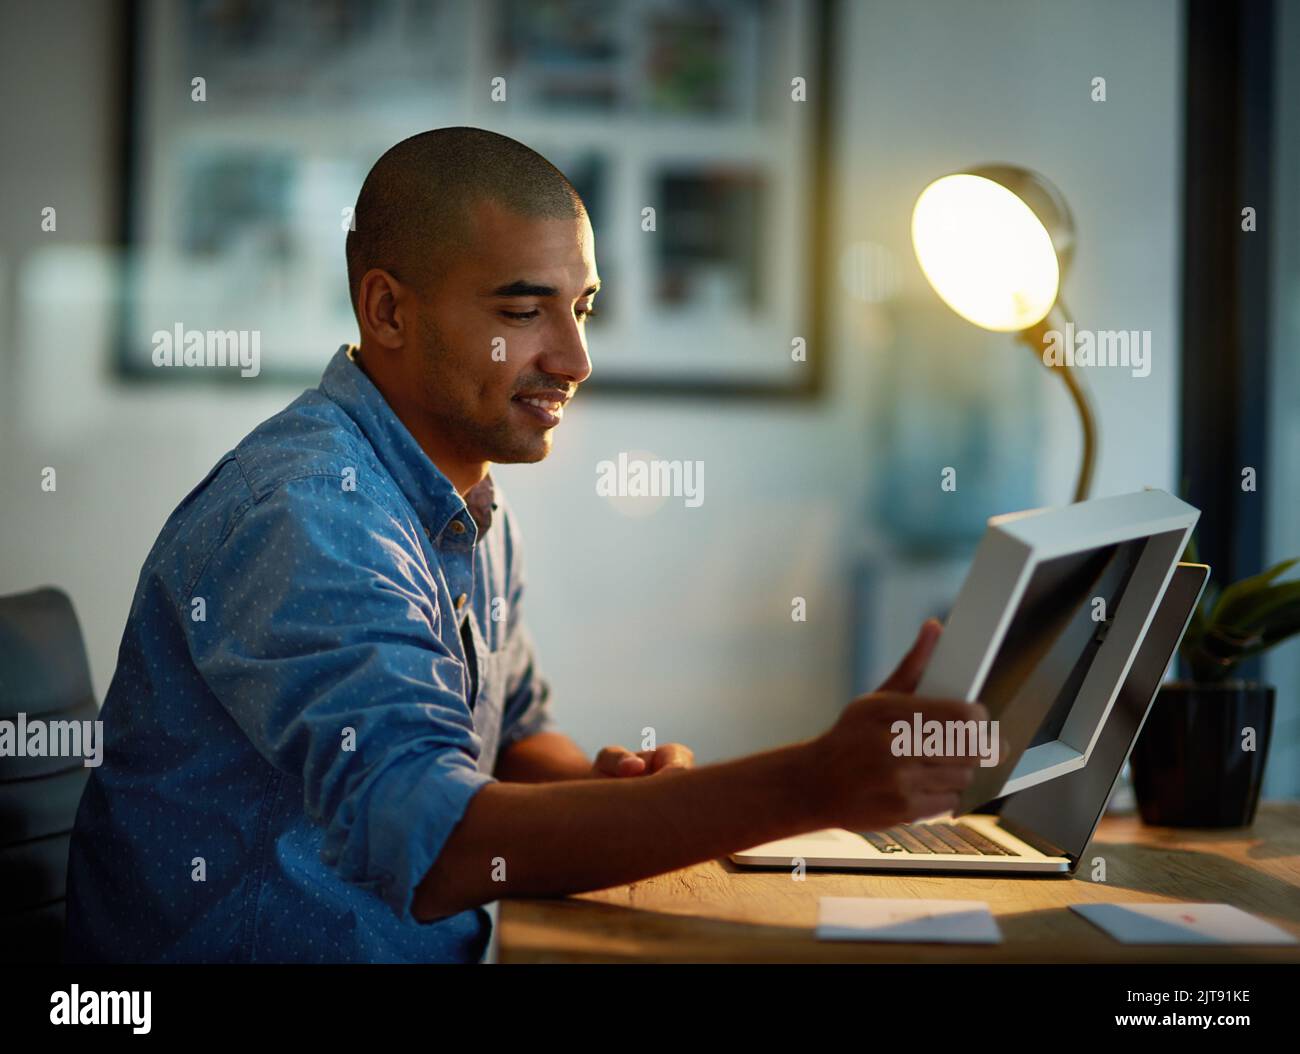 Businessman at the desk, office gadgets and supplies Stock Photo - Alamy